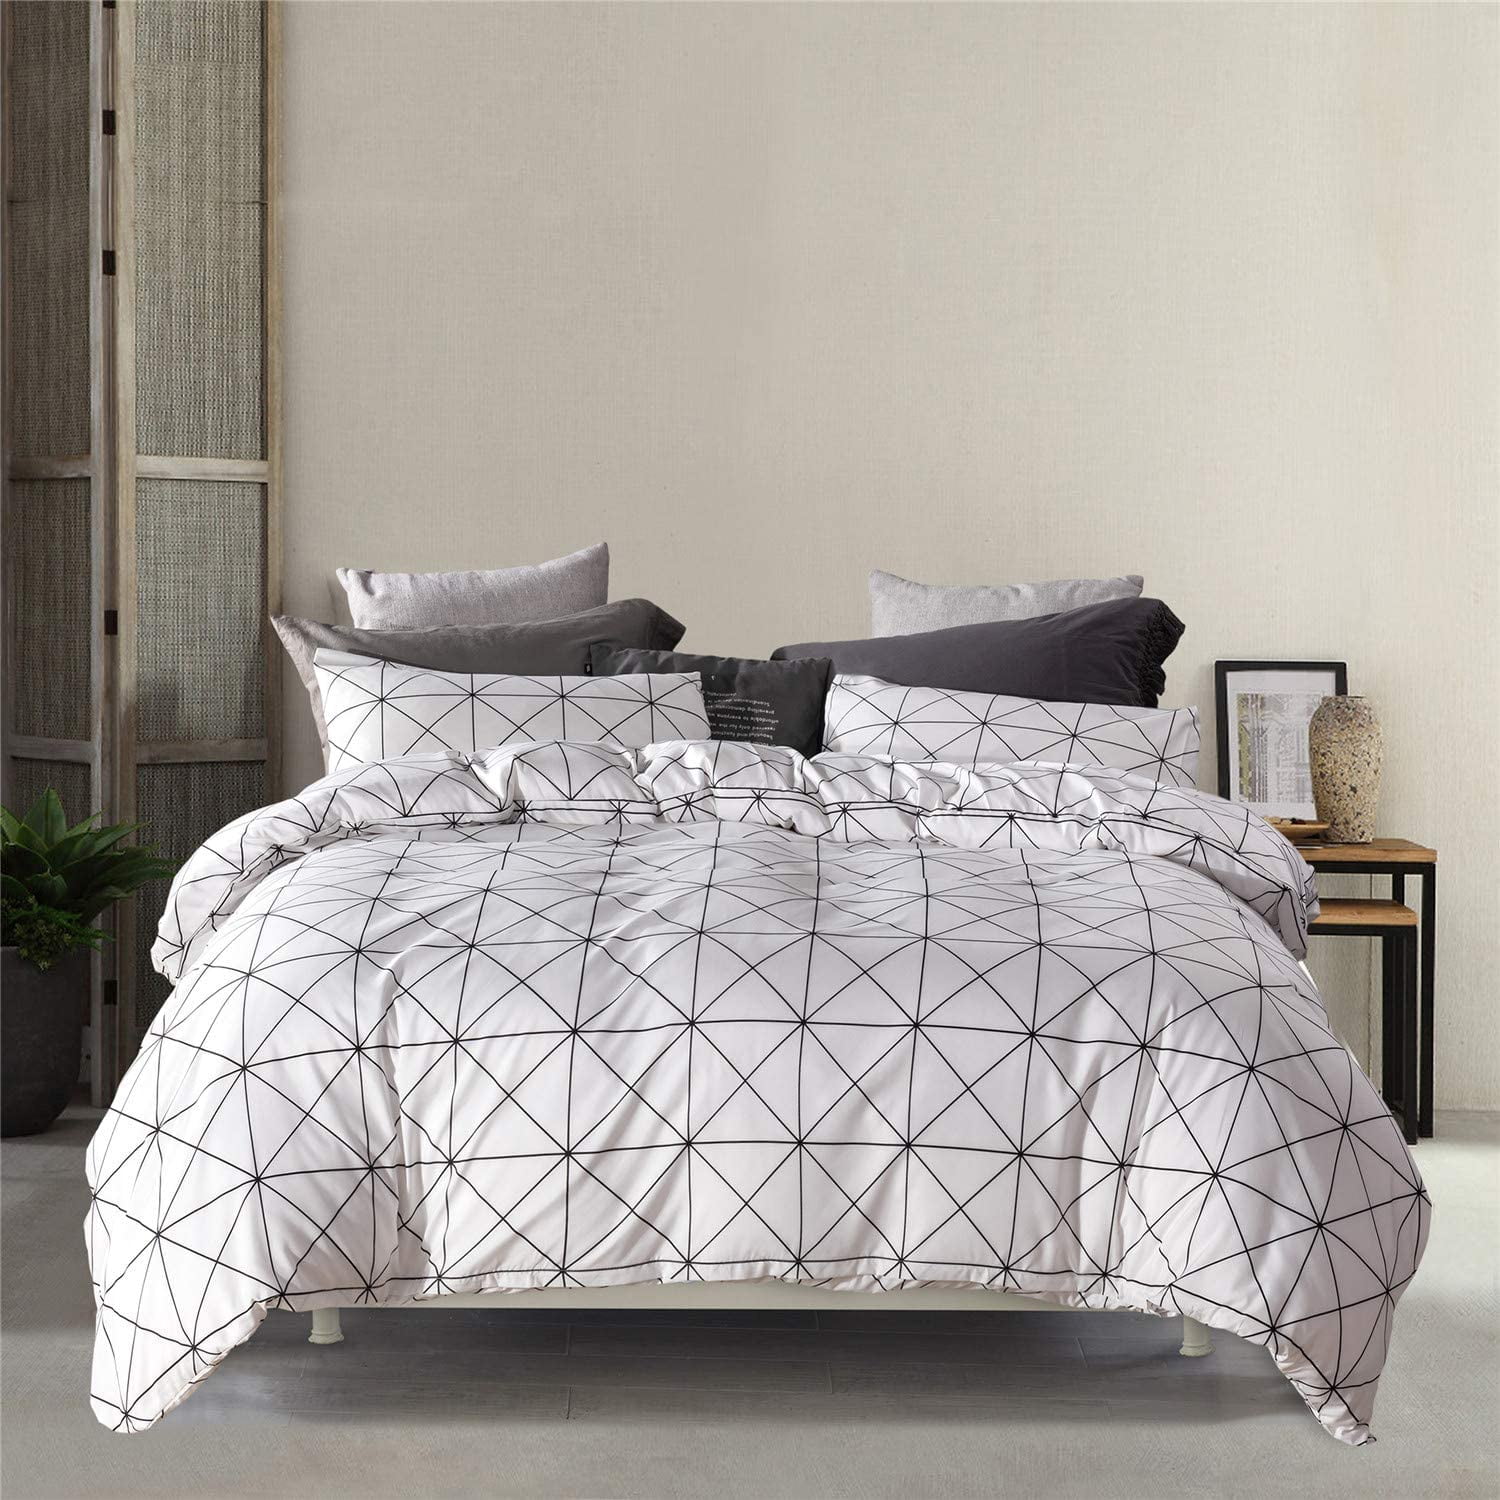 BuLuTu Geometric Triangle Print Navy/Grey Duvet Cover Set Twin Cotton for Kids Teen Boys Girls Adults with Zipper Closure and Ties,Twin Size,No Comforter 